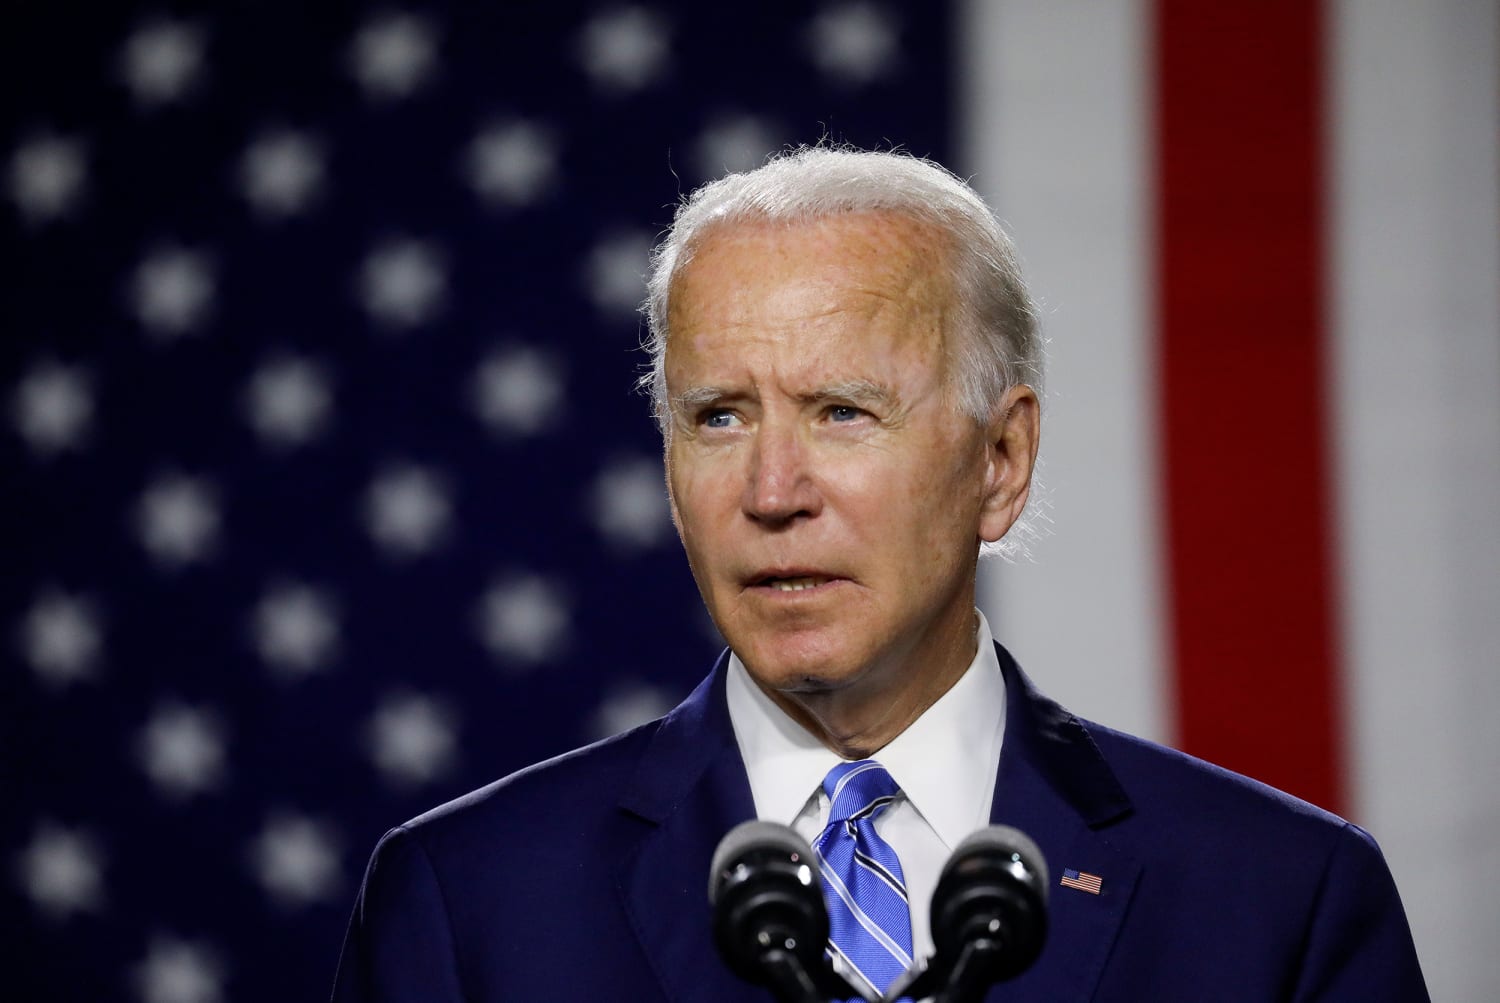 Poesi at retfærdiggøre adelig Joe Biden's vice presidential pick will be deeply consequential. That is  far from the norm.